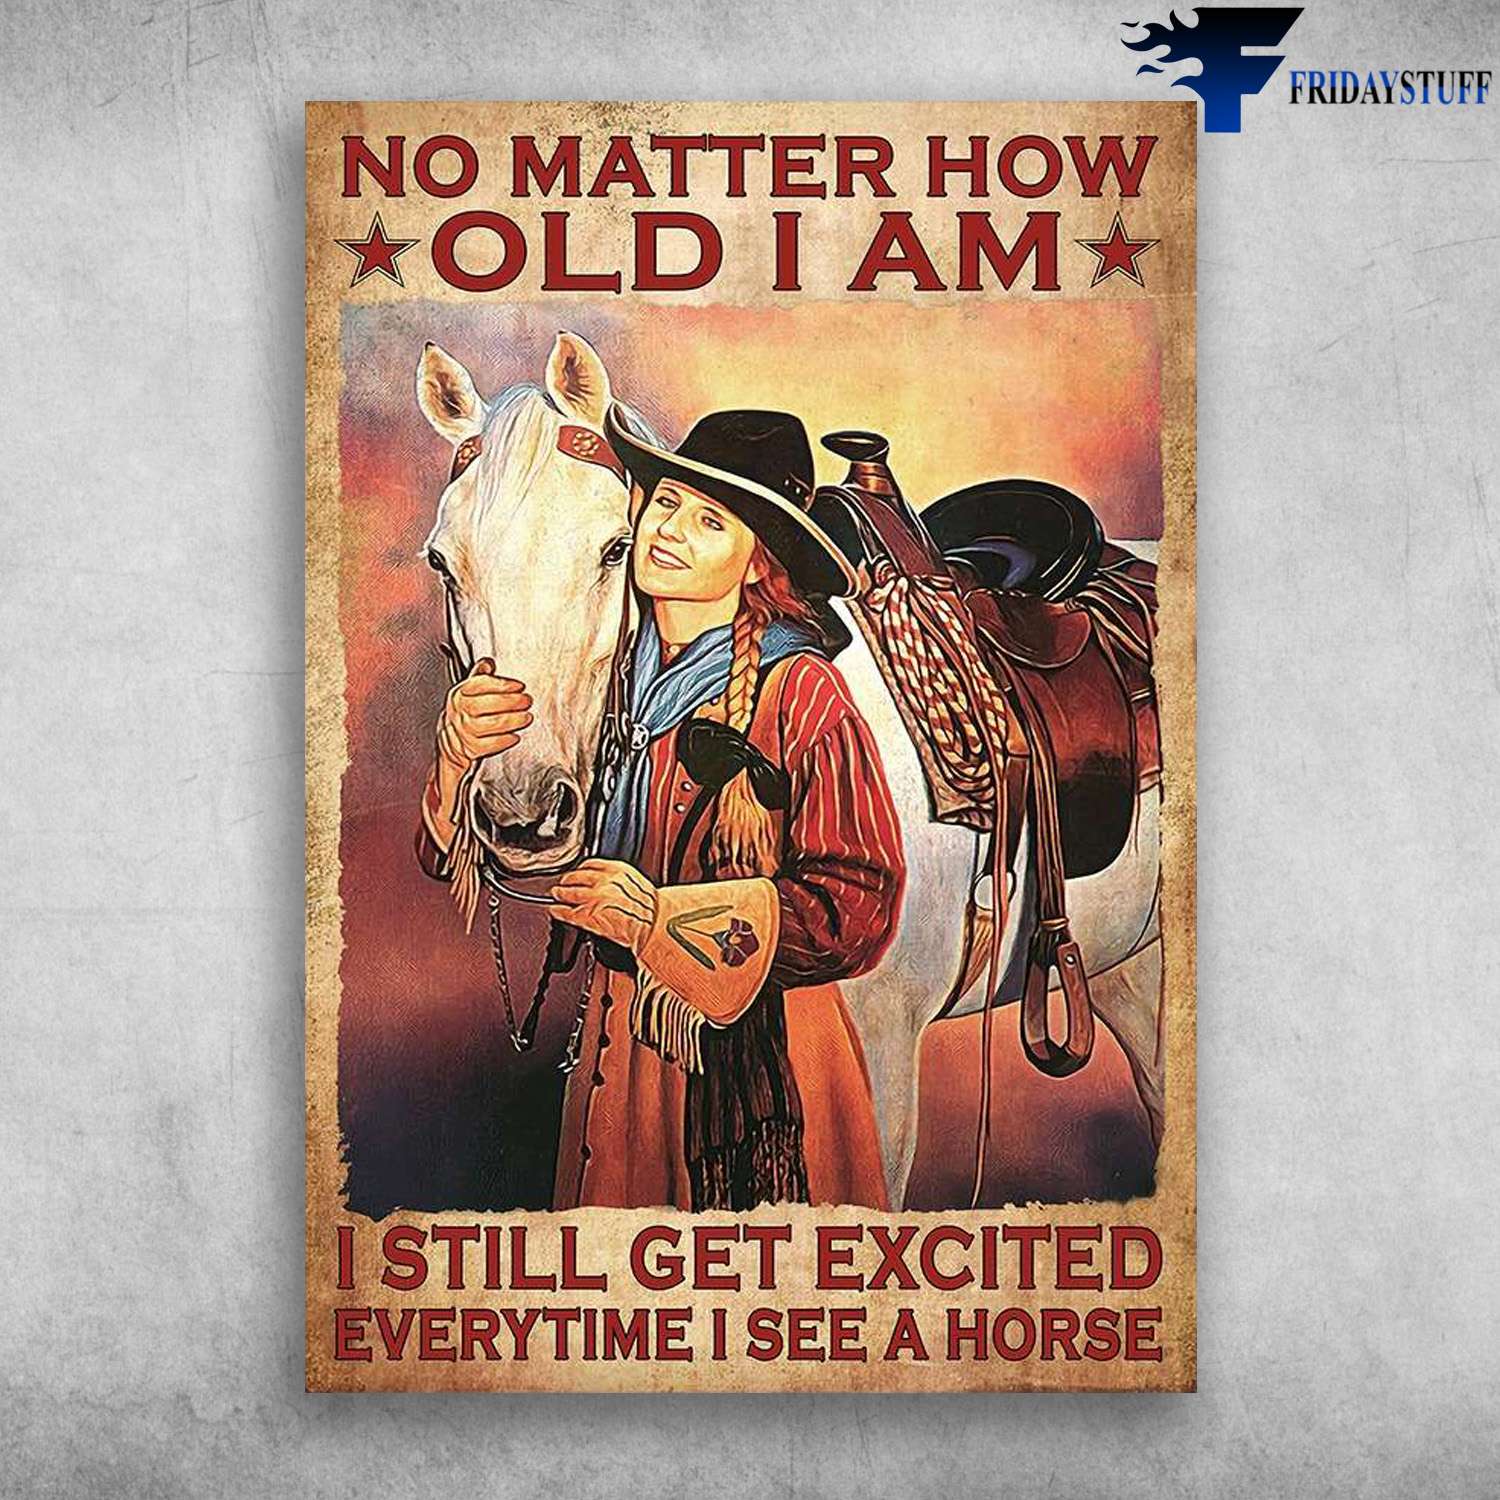 Lady Cowgirl, Horse Cowgirl - No Matter How Old I Am, I Still Get Excited, Everytime I See A Horse